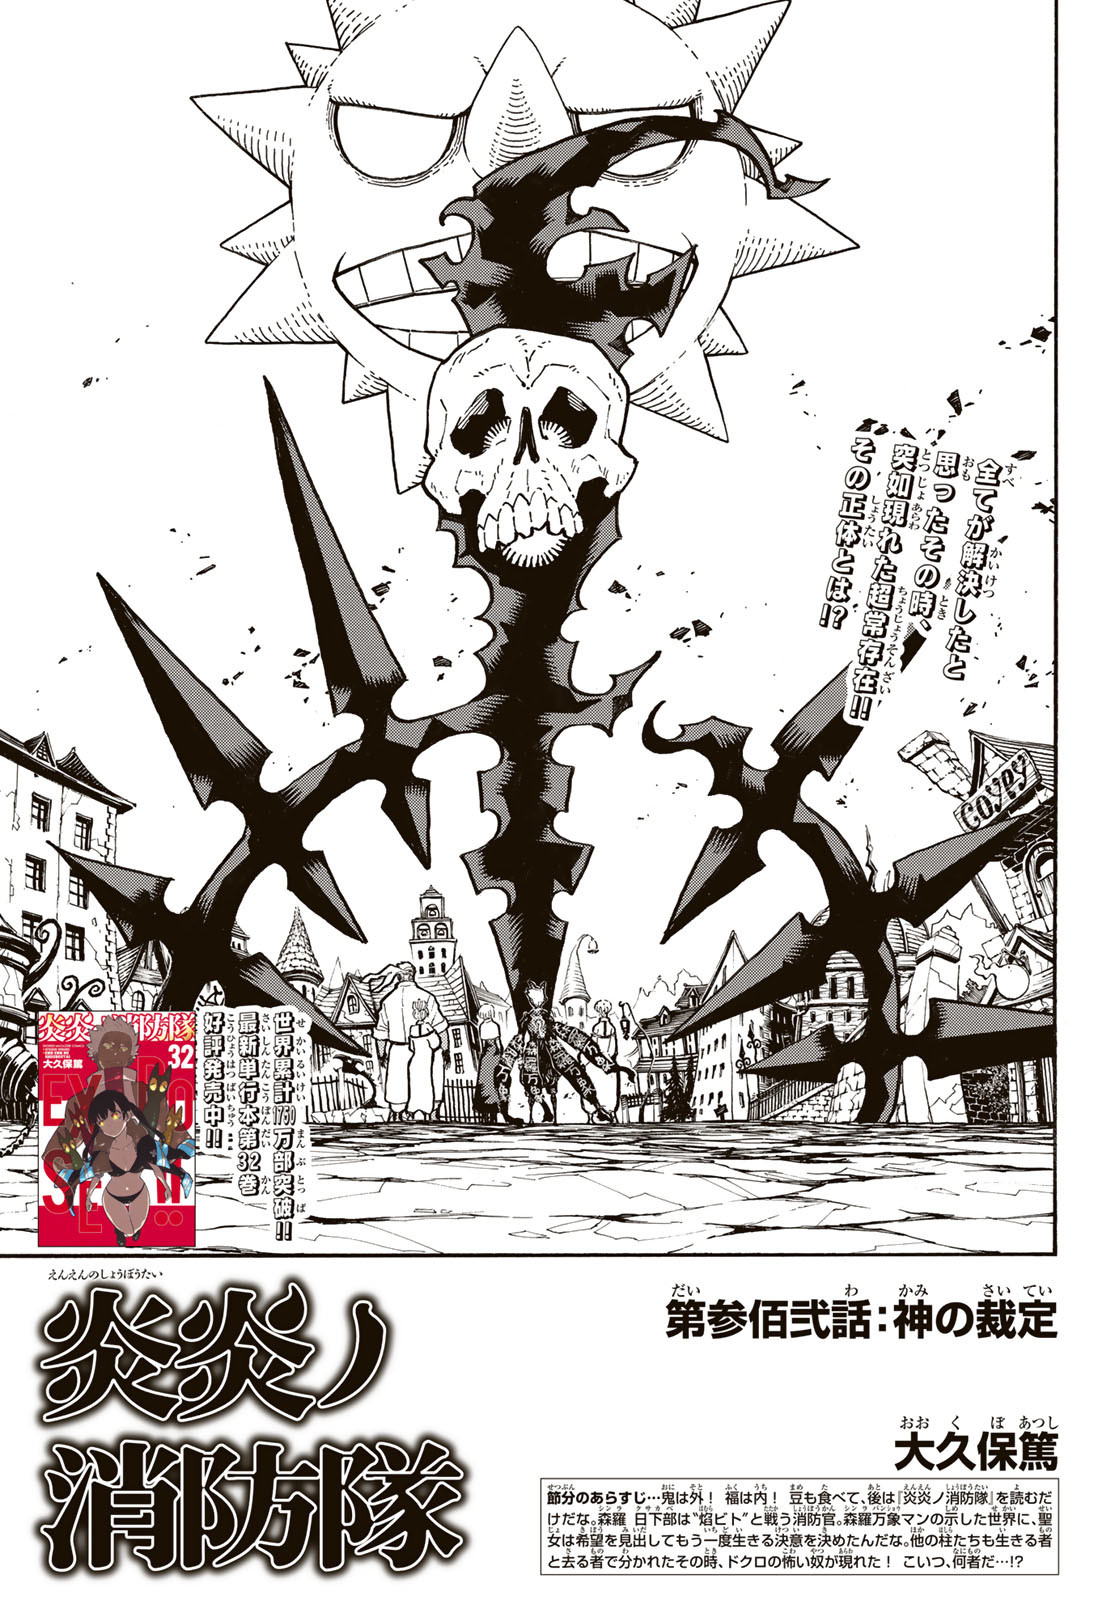 Enen no Shouboutai Chapter 48 Discussion - Forums 